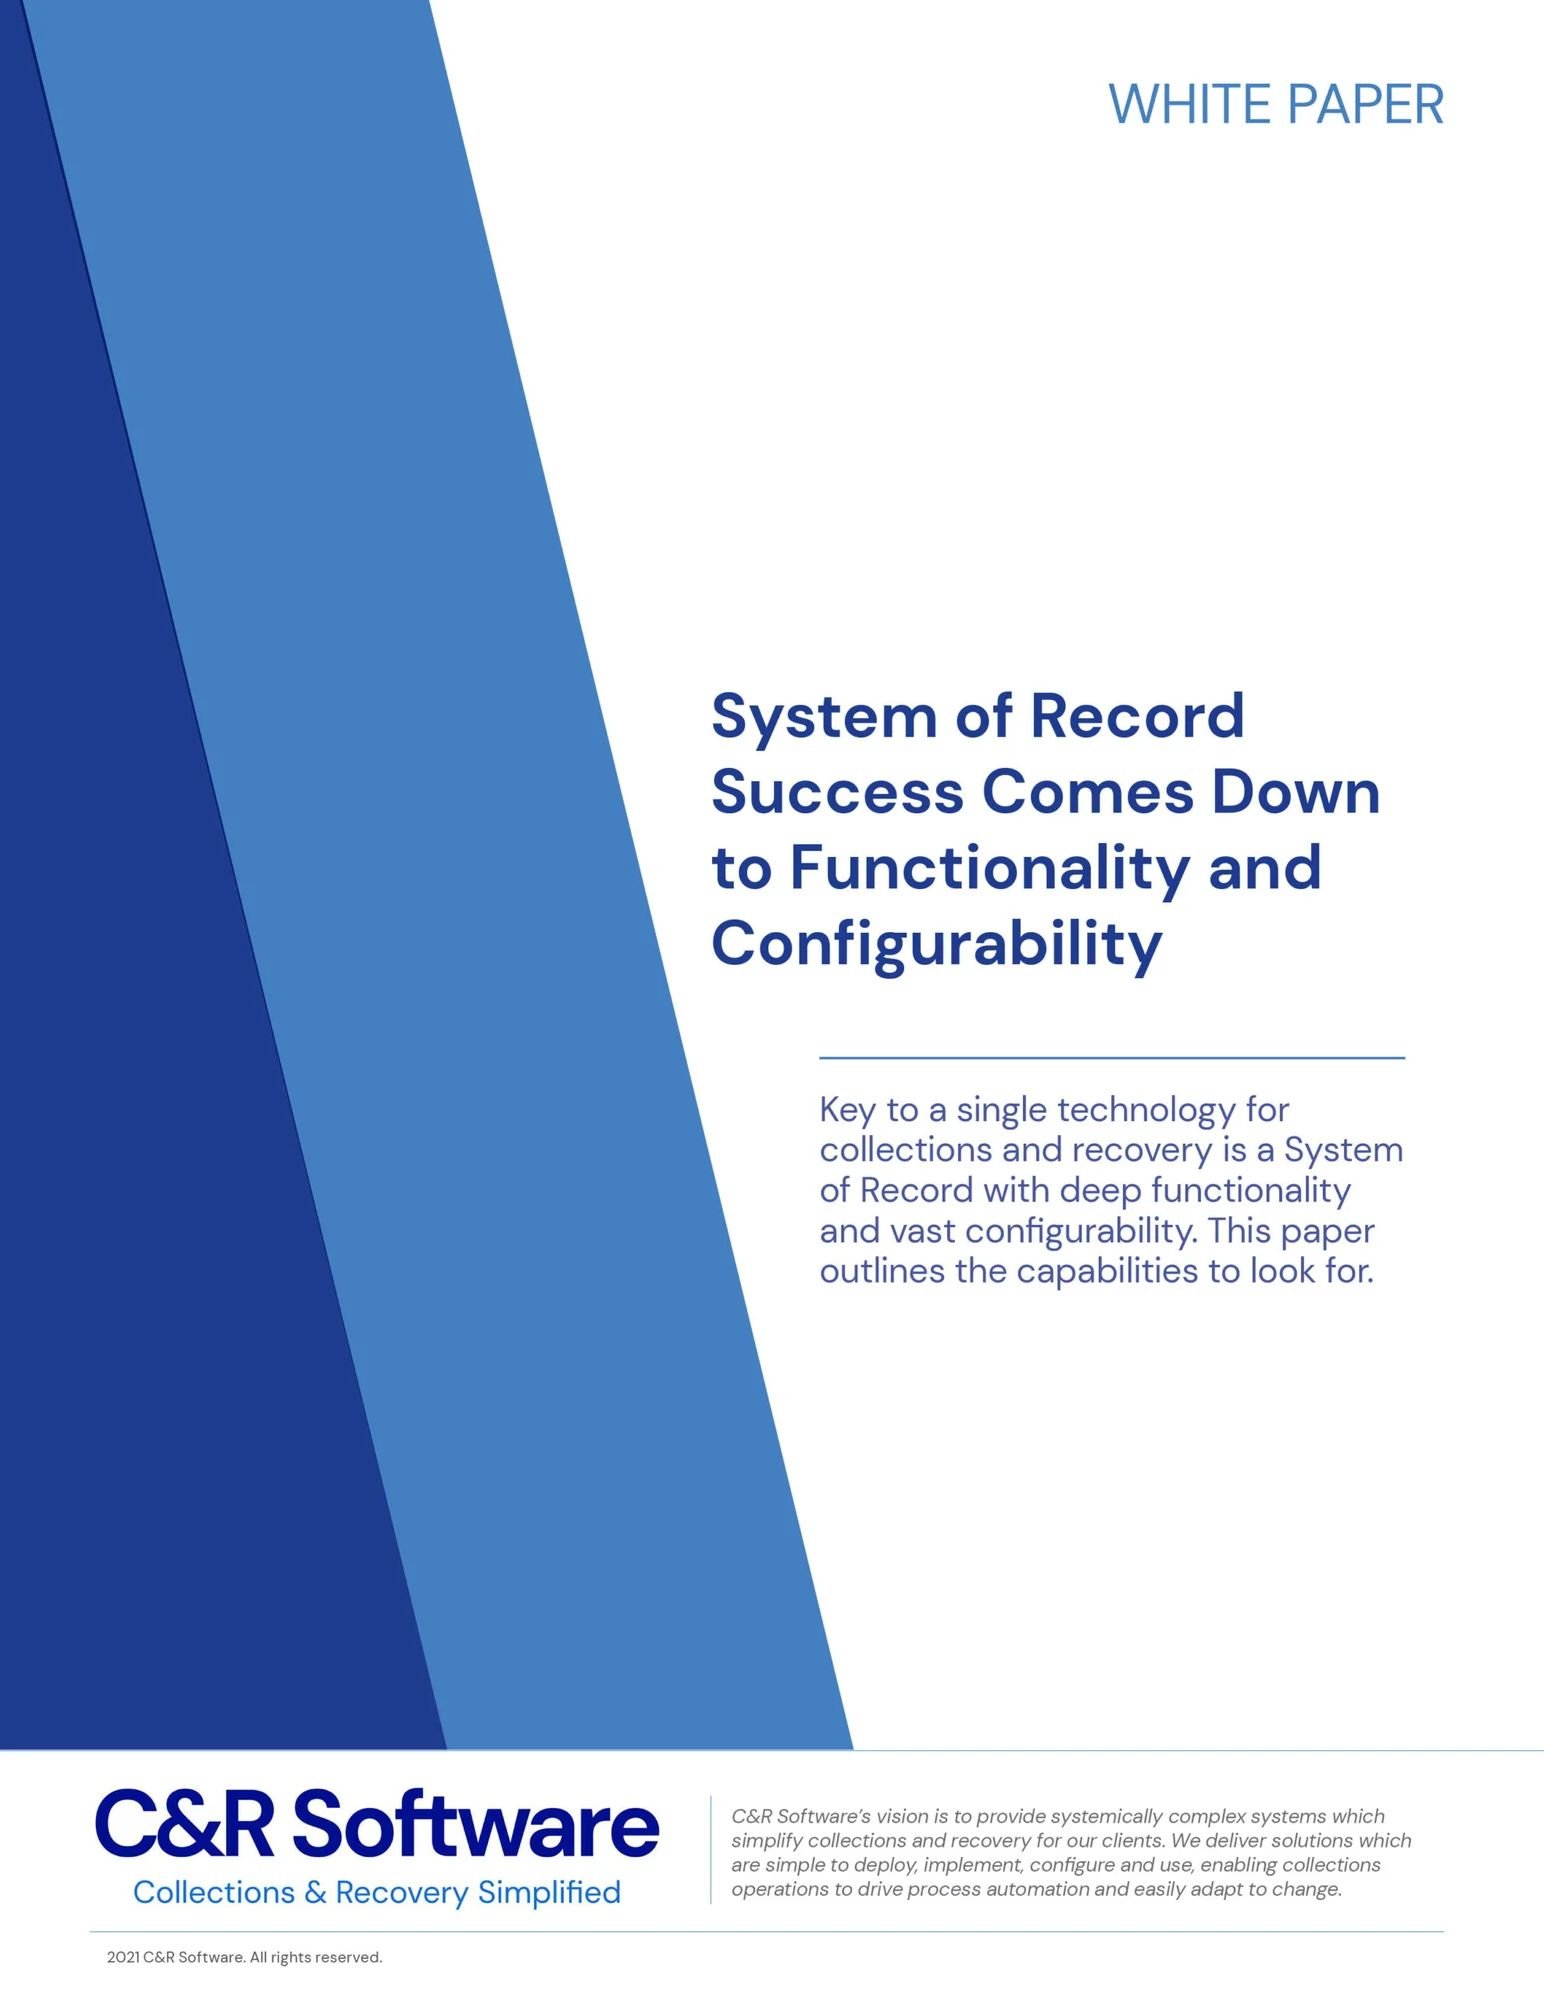 White-Paper-System-of-Record-Success-Comes-Down-to-Functionality-and-Configurability-1-scaled